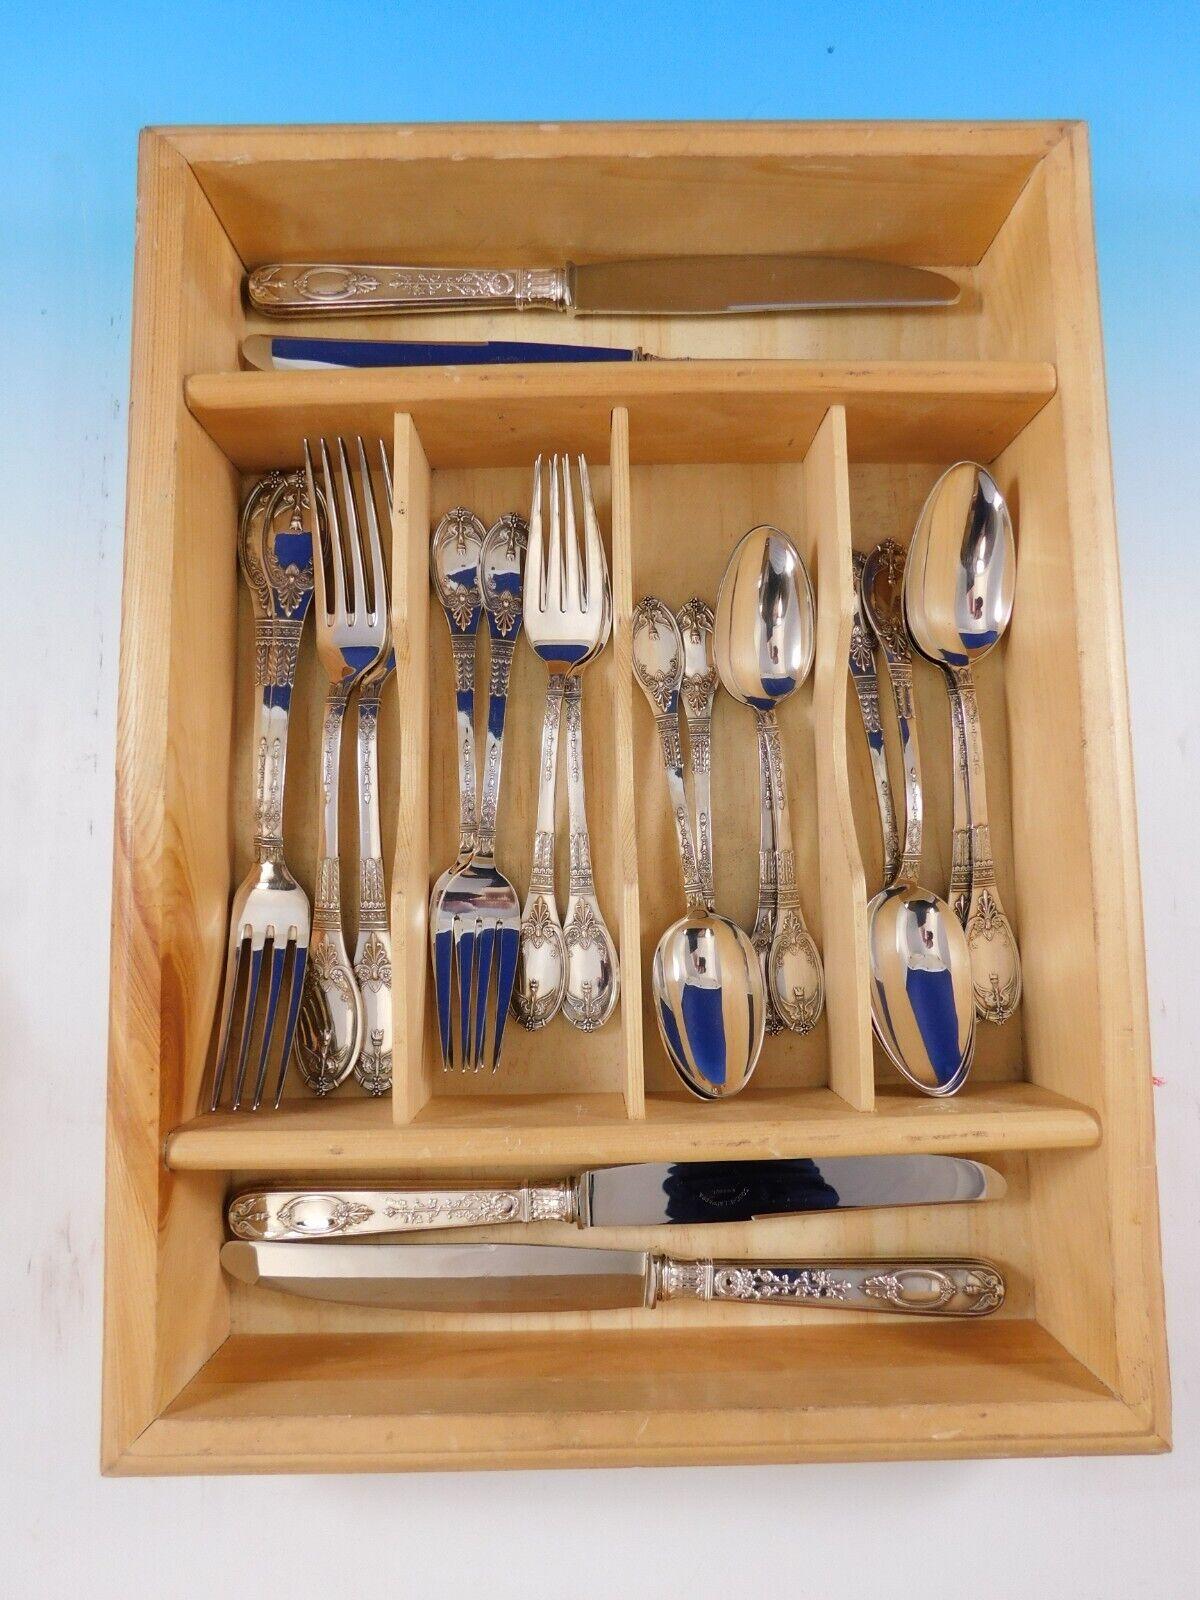 Lovely Baron Gerard by Souche-Lapparra French 925 sterling silver set with beautiful floral, leaf and wing design - 20 pieces. This set includes:

4 Dinner Knives, 10